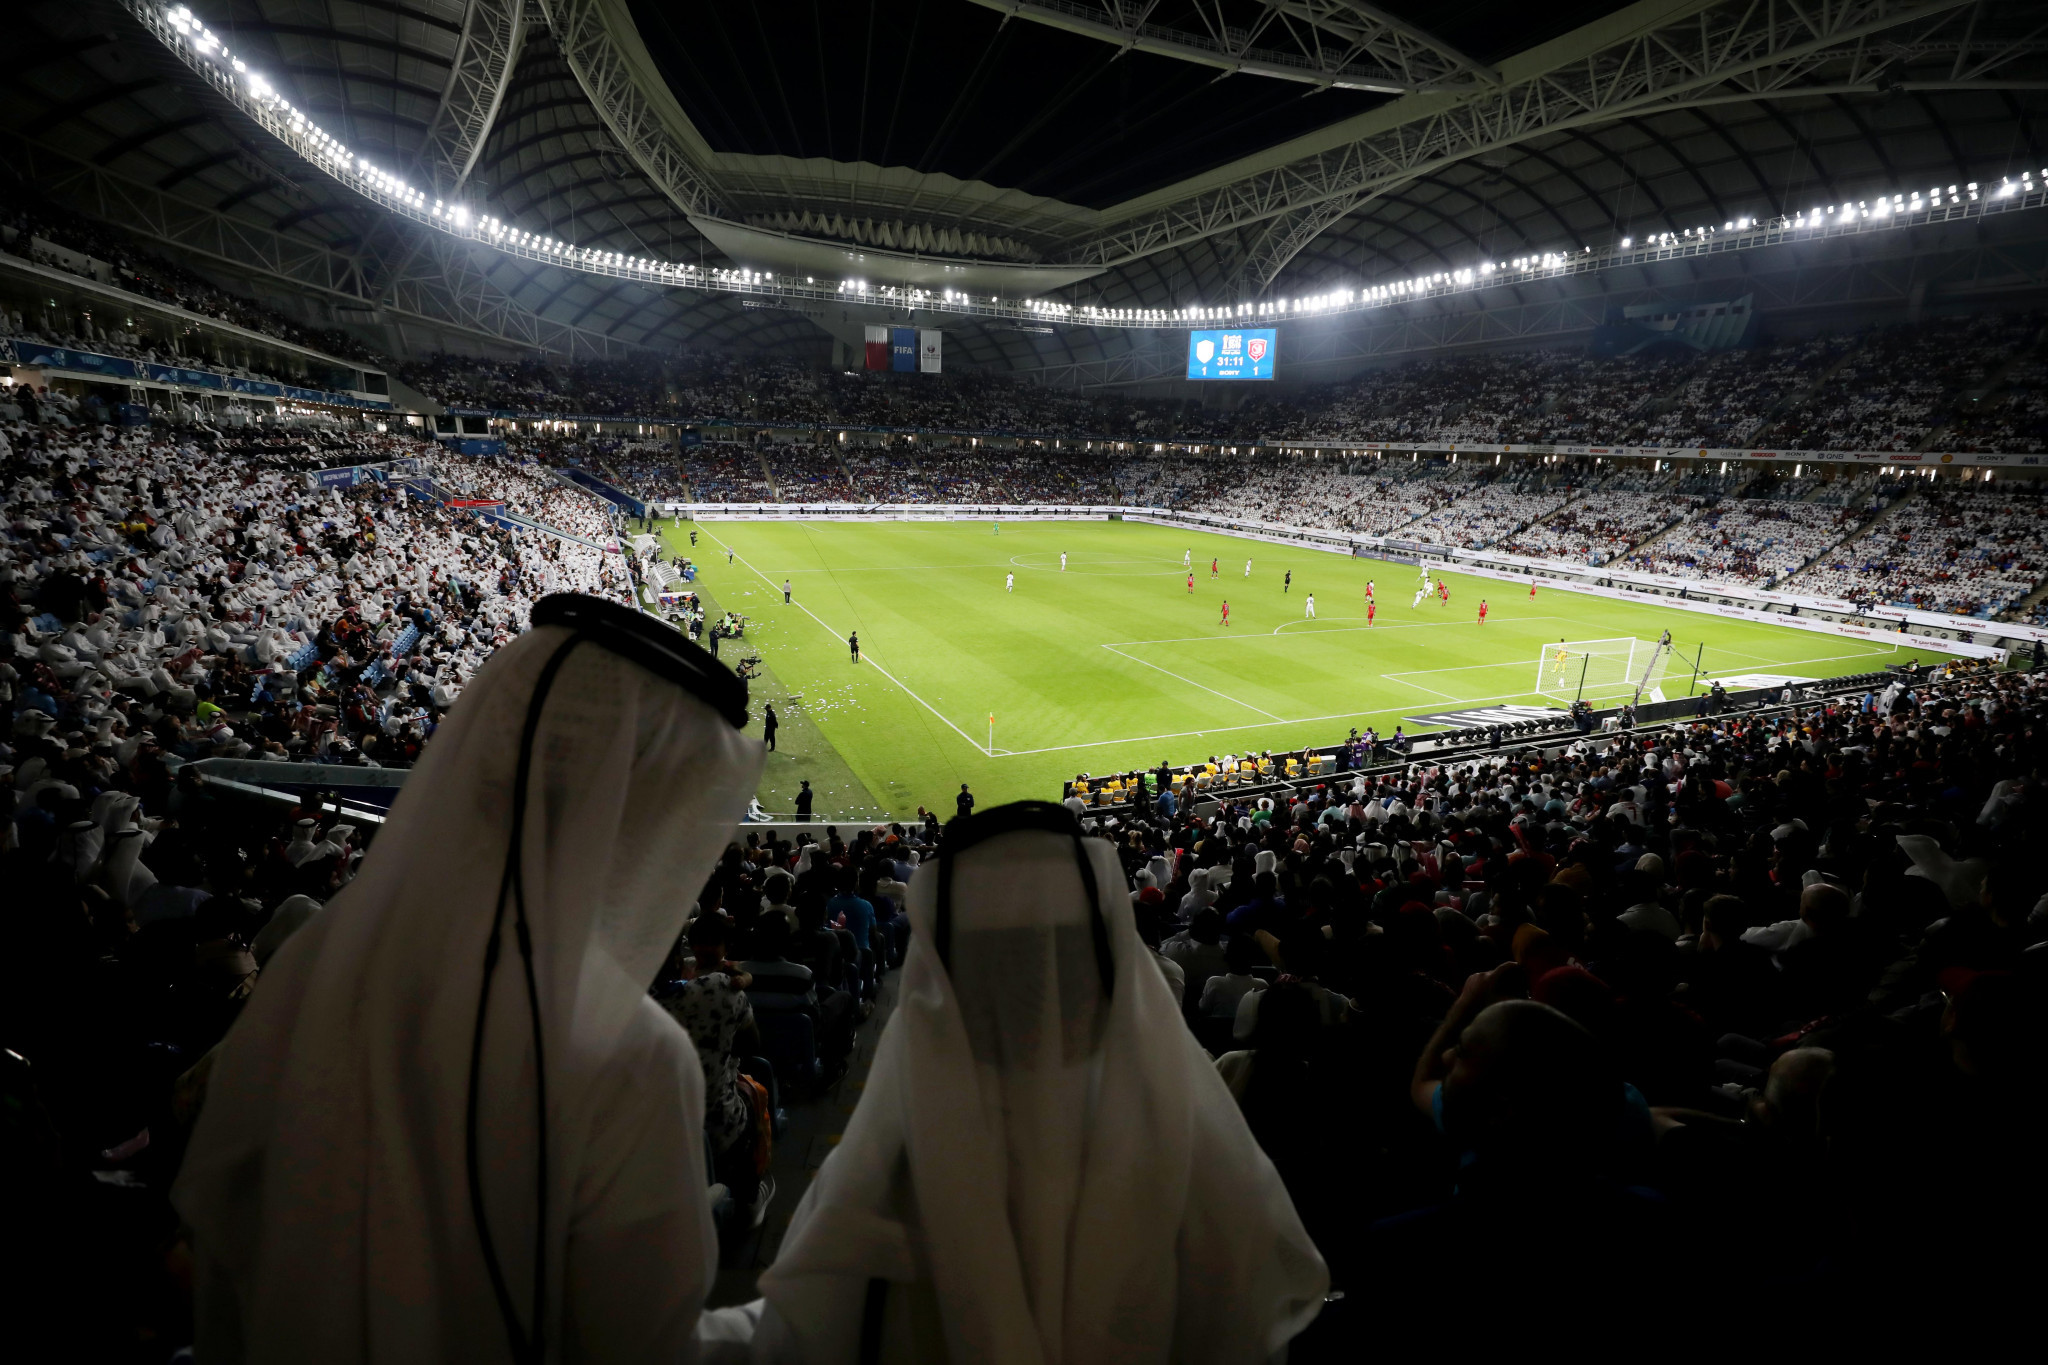 Qatar has been awarded the hosting rights for the 2019 and 2020 FIFA Club World Cups ©Getty Images